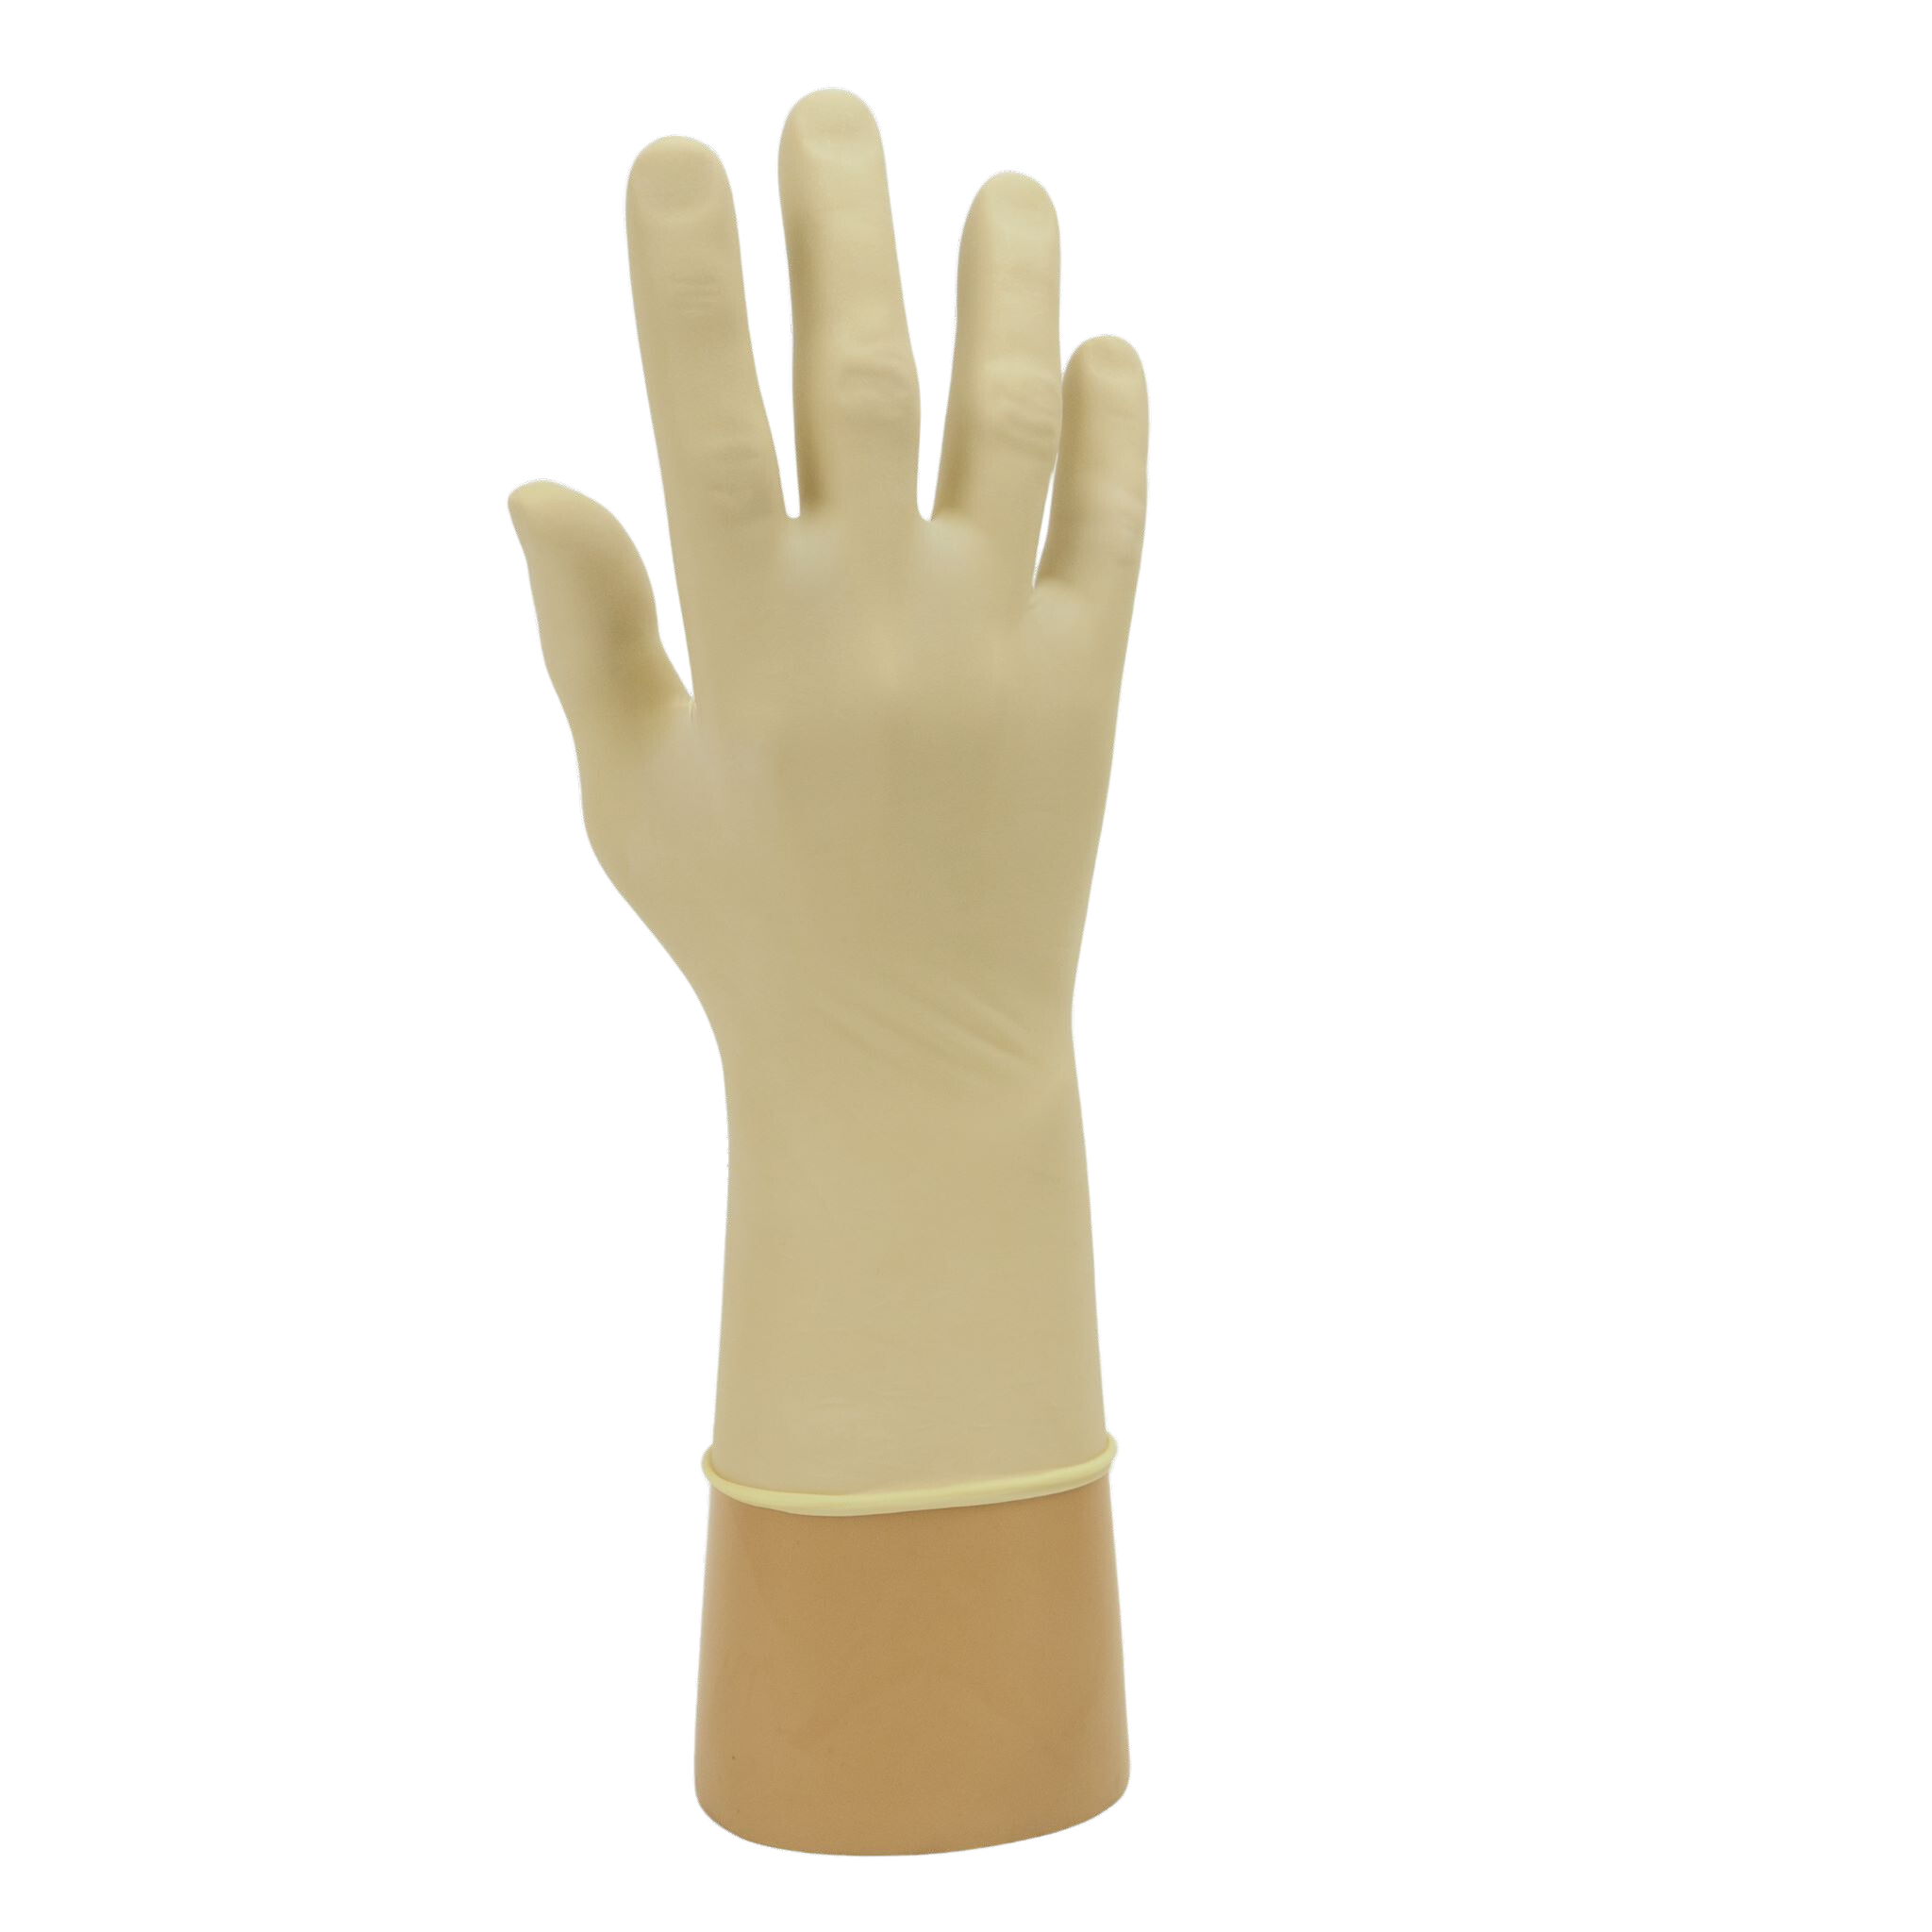 Synthetic Powder Free Glove (Xlarge) - Pack of 100